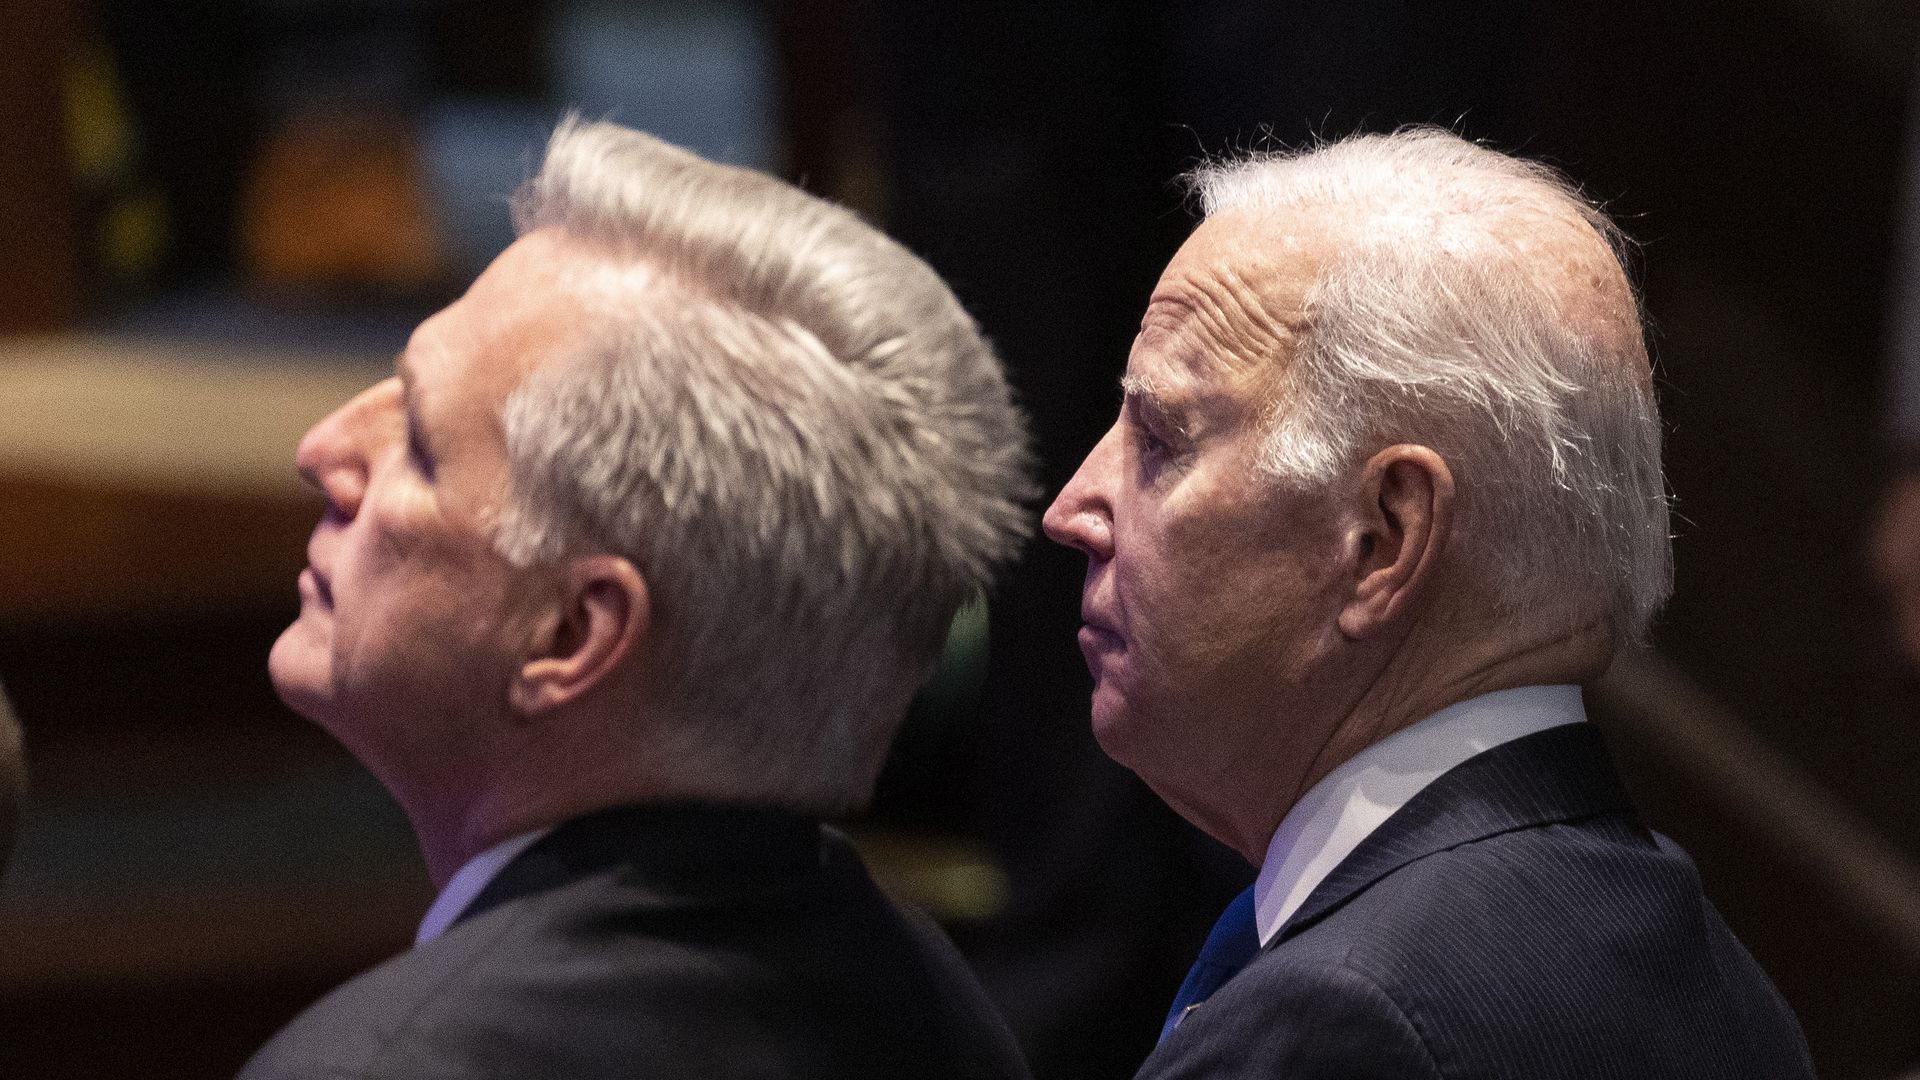 President Joe Biden (R) sits next to Speaker of the House Kevin McCarthy (R-CA) during the National Prayer Breakfast at the U.S. Capitol.